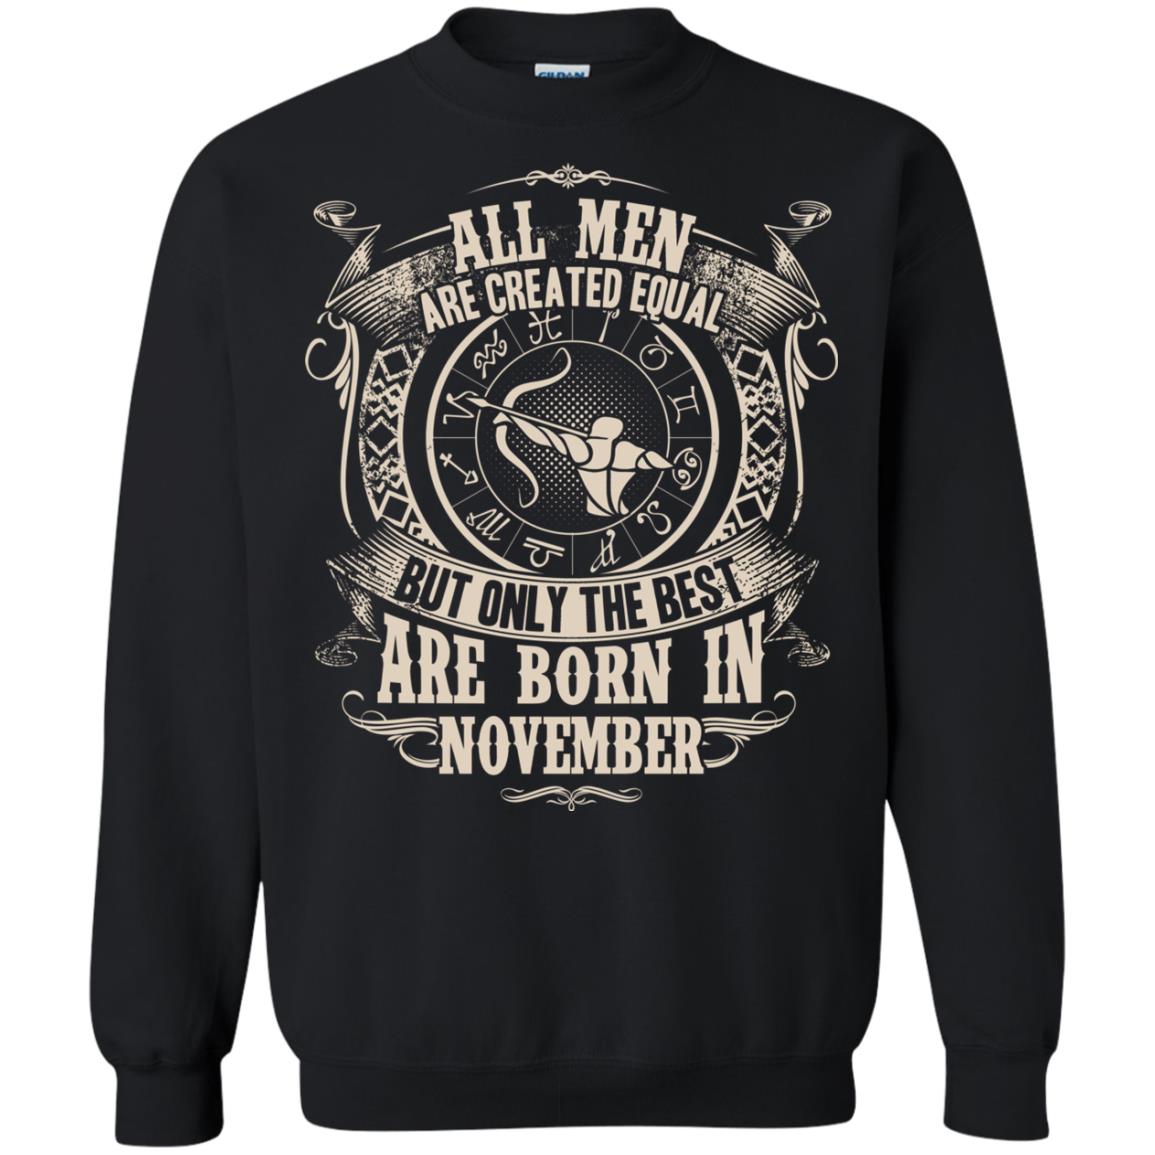 All Men Are Created Equal, But Only The Best Are Born In November T-shirtG180 Gildan Crewneck Pullover Sweatshirt 8 oz.